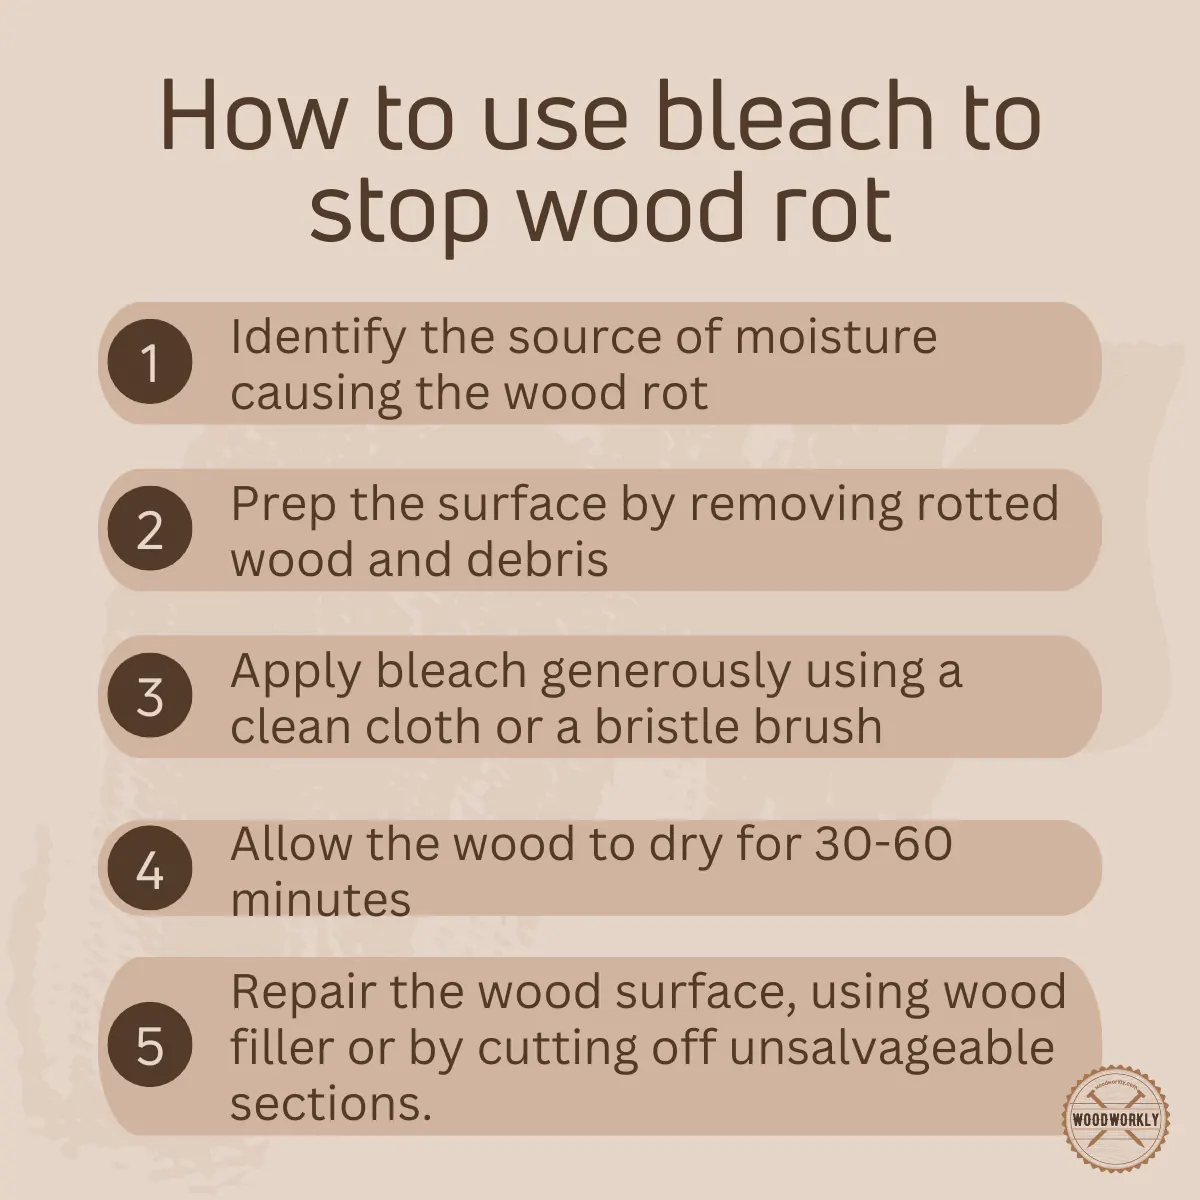 How to use bleach to stop wood rot